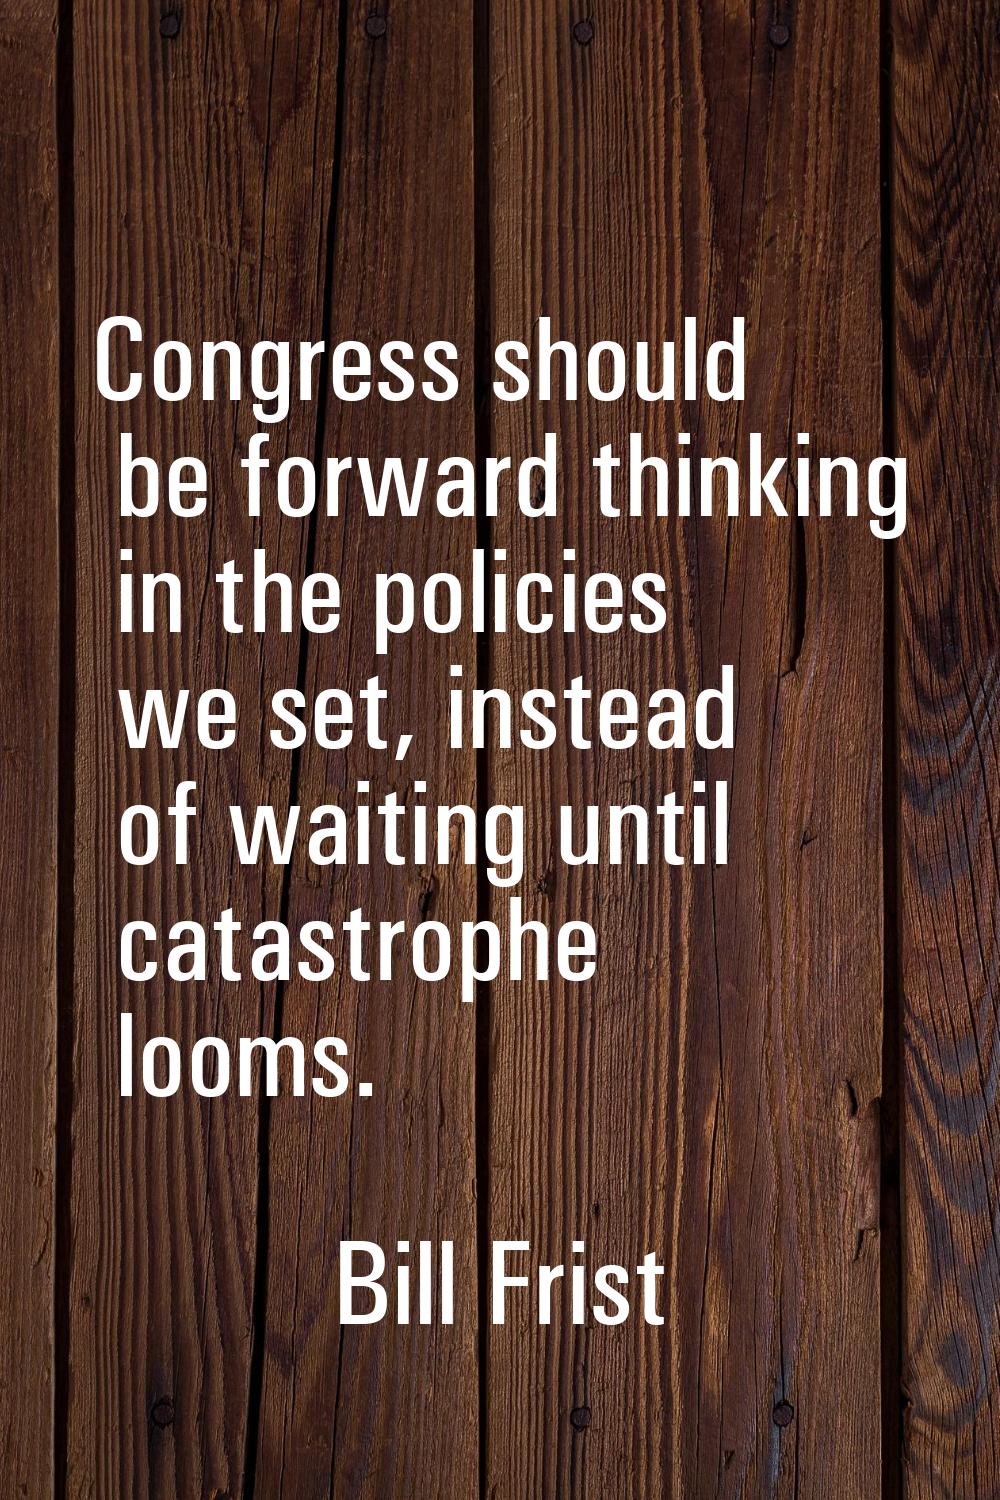 Congress should be forward thinking in the policies we set, instead of waiting until catastrophe lo